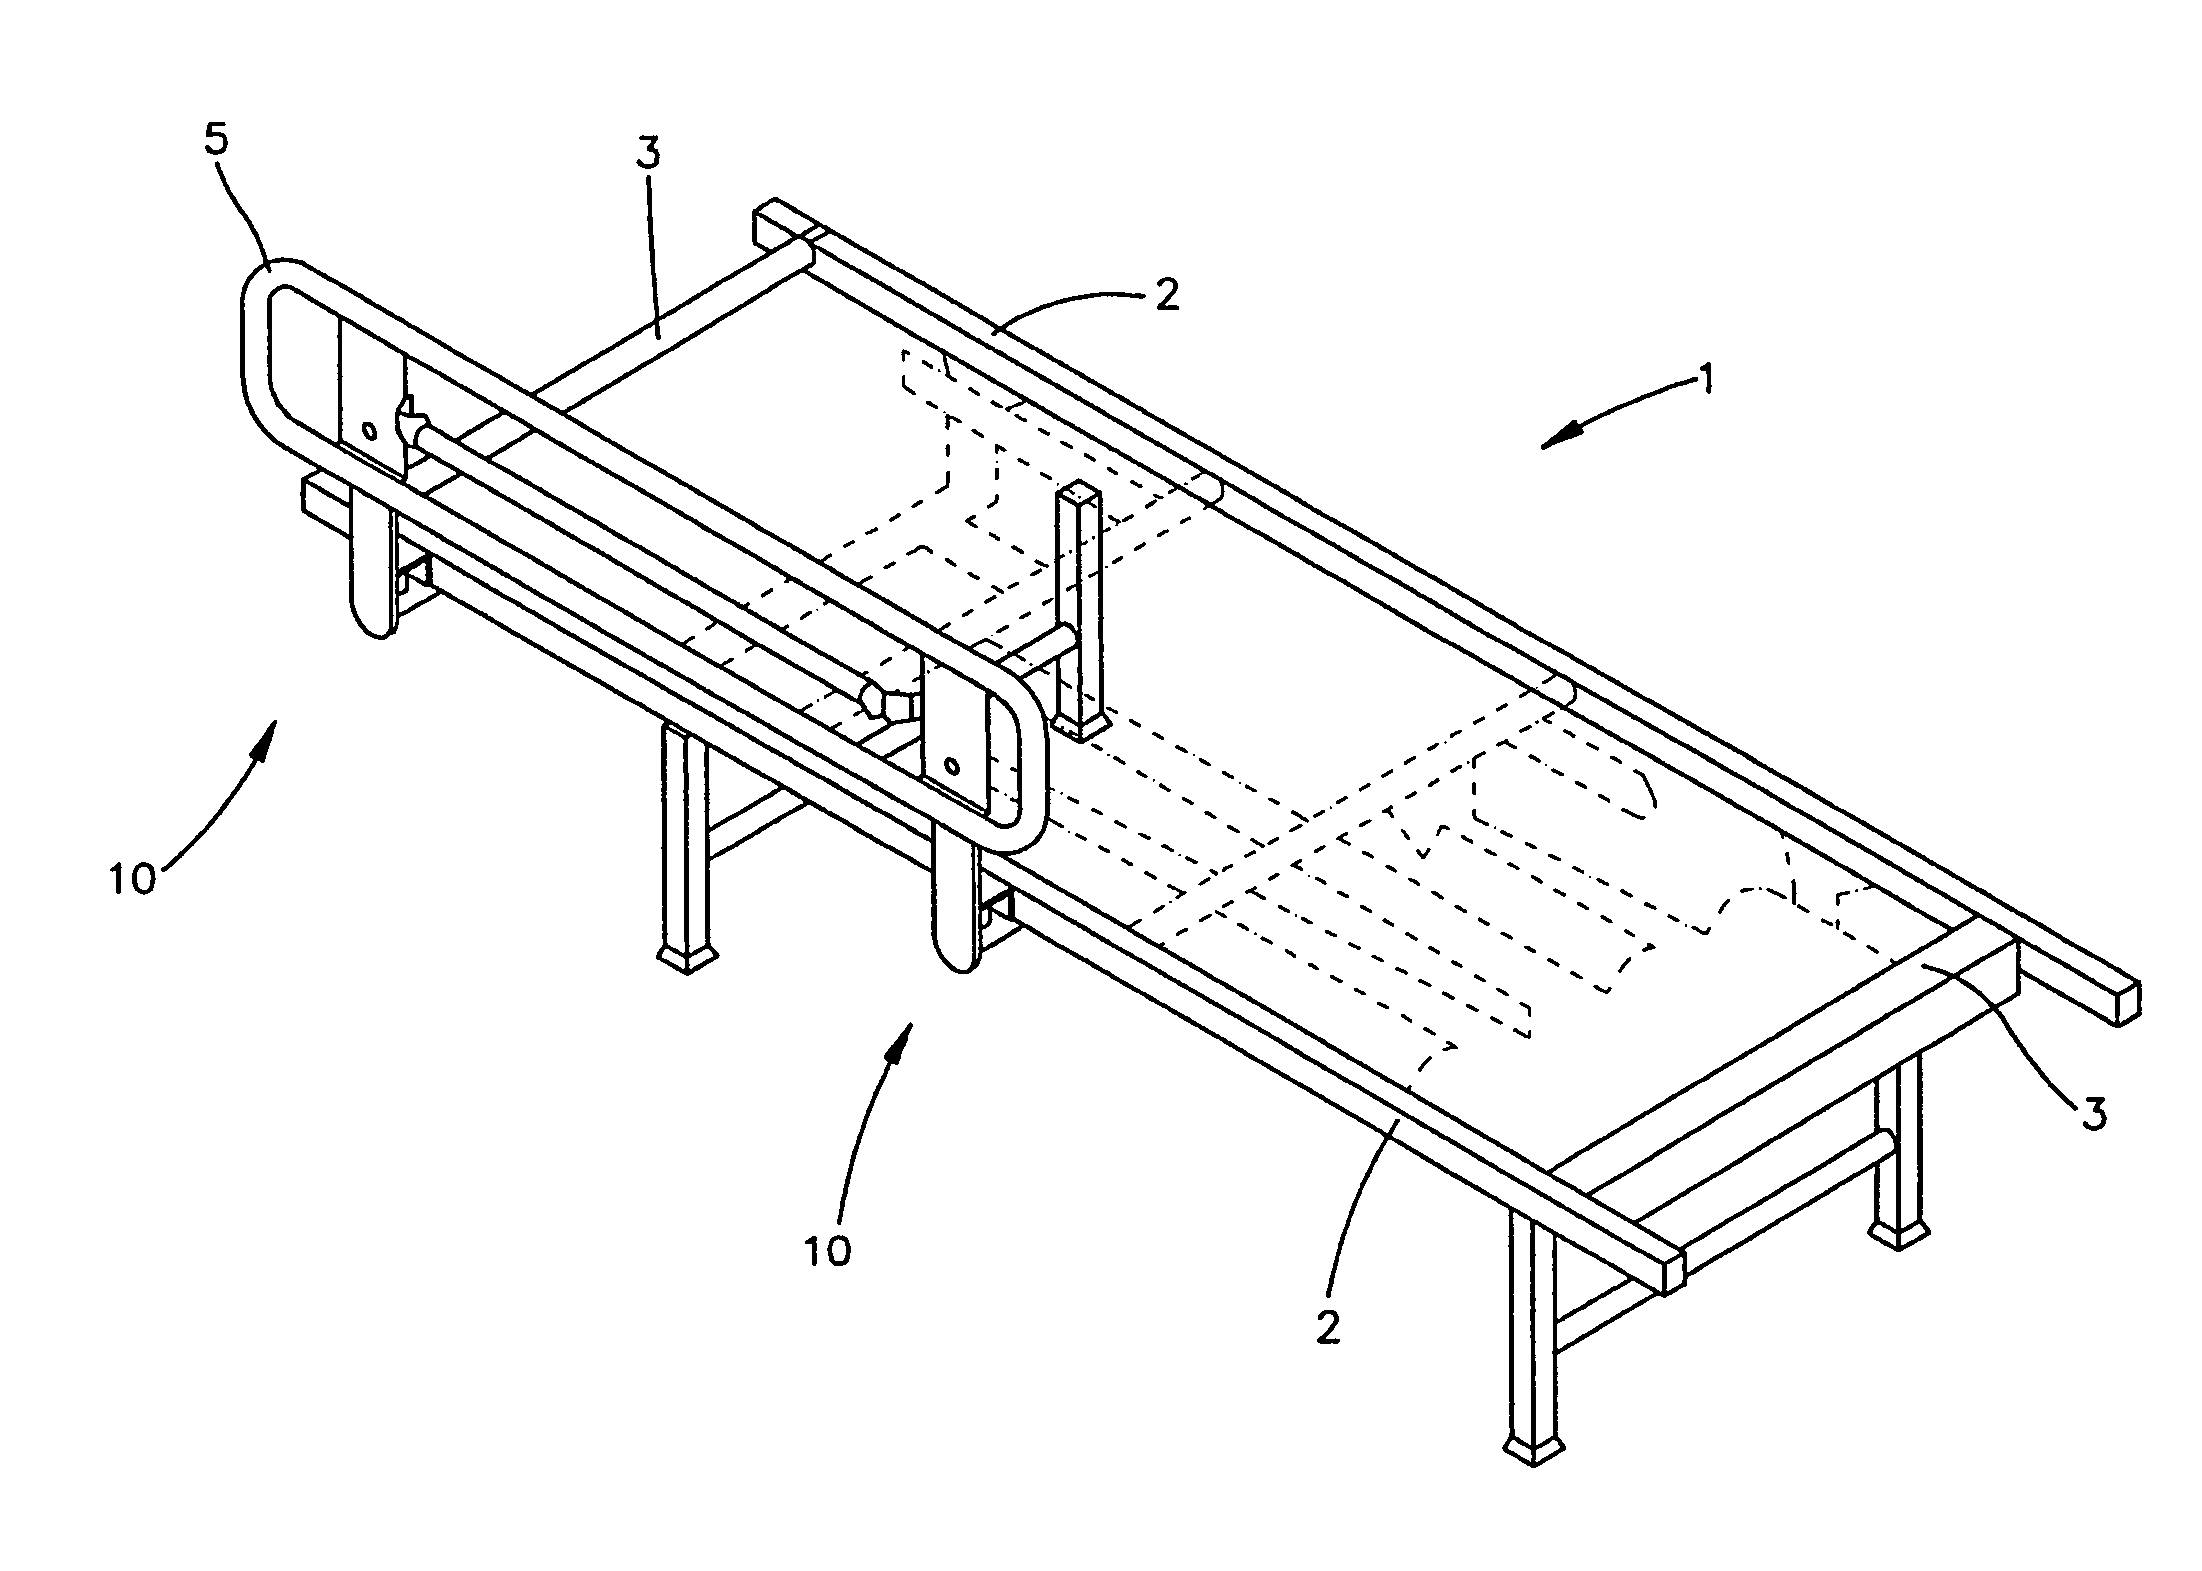 Bed with anti-rattle mechanism for a bed rail